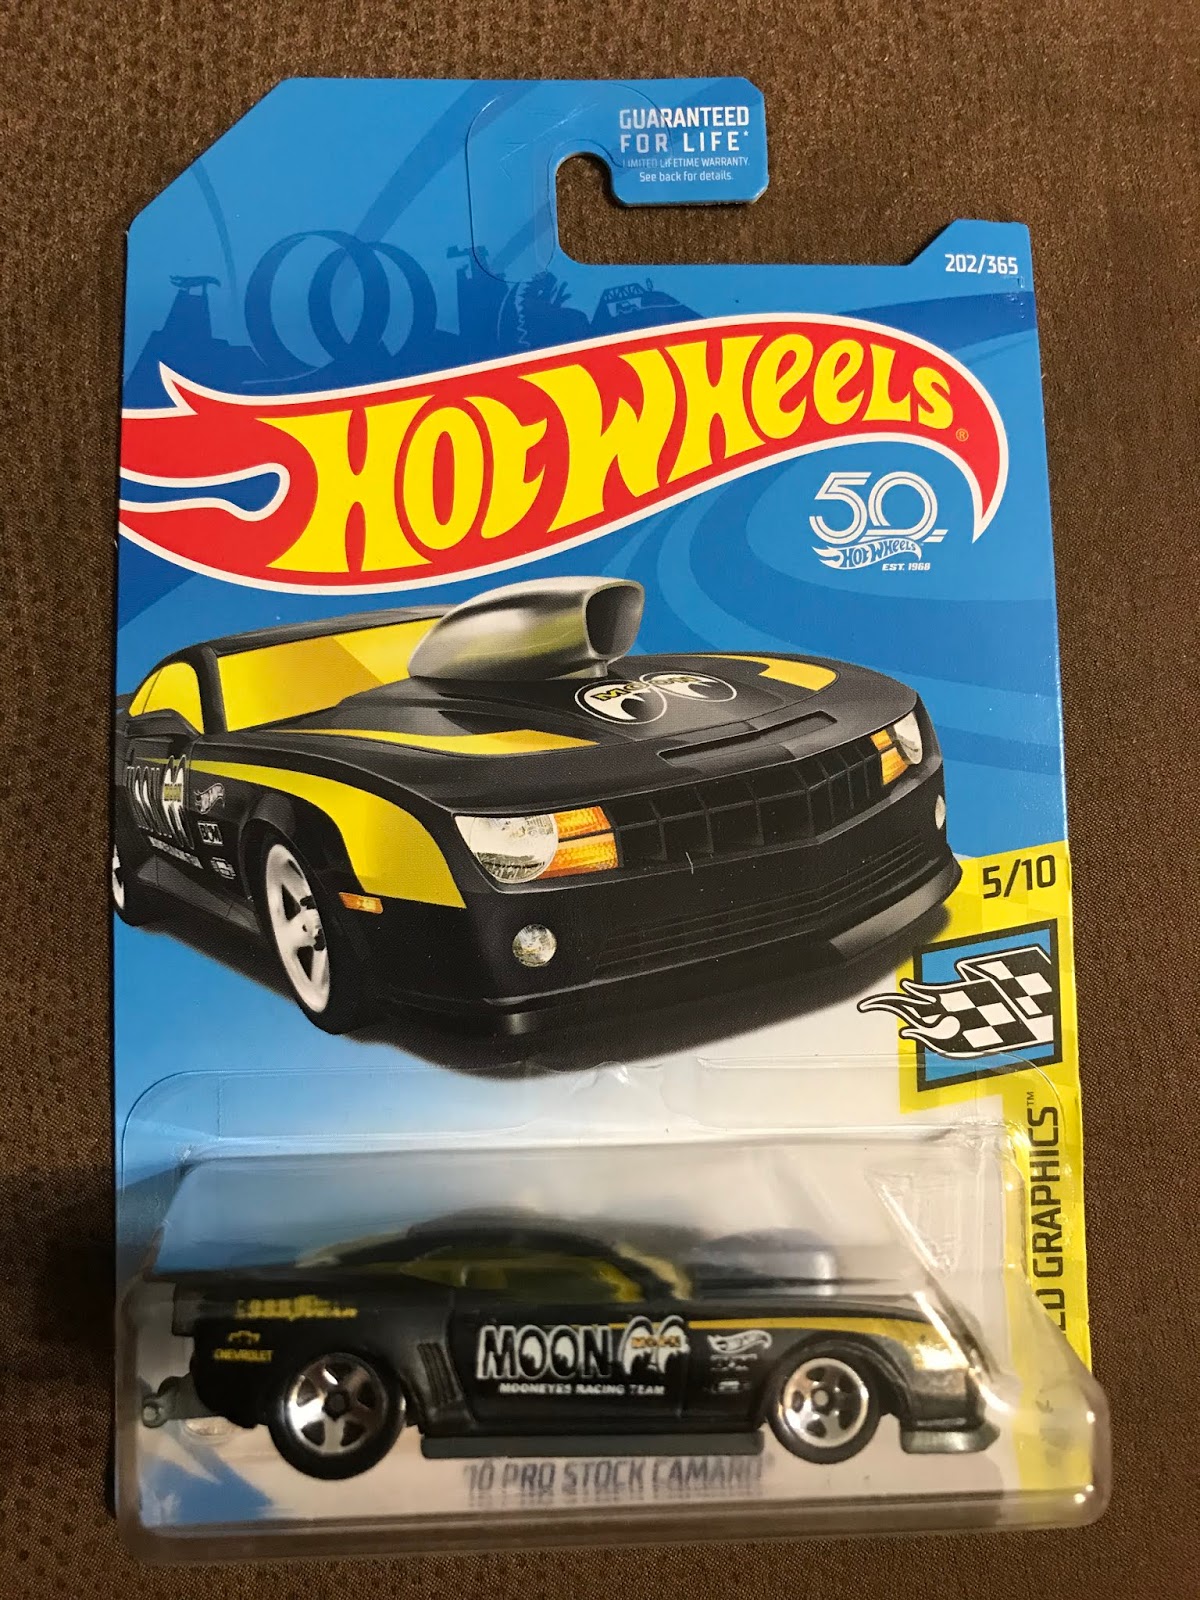 Hot Wheels Single Packs Multiple Generations Series and Years Styles